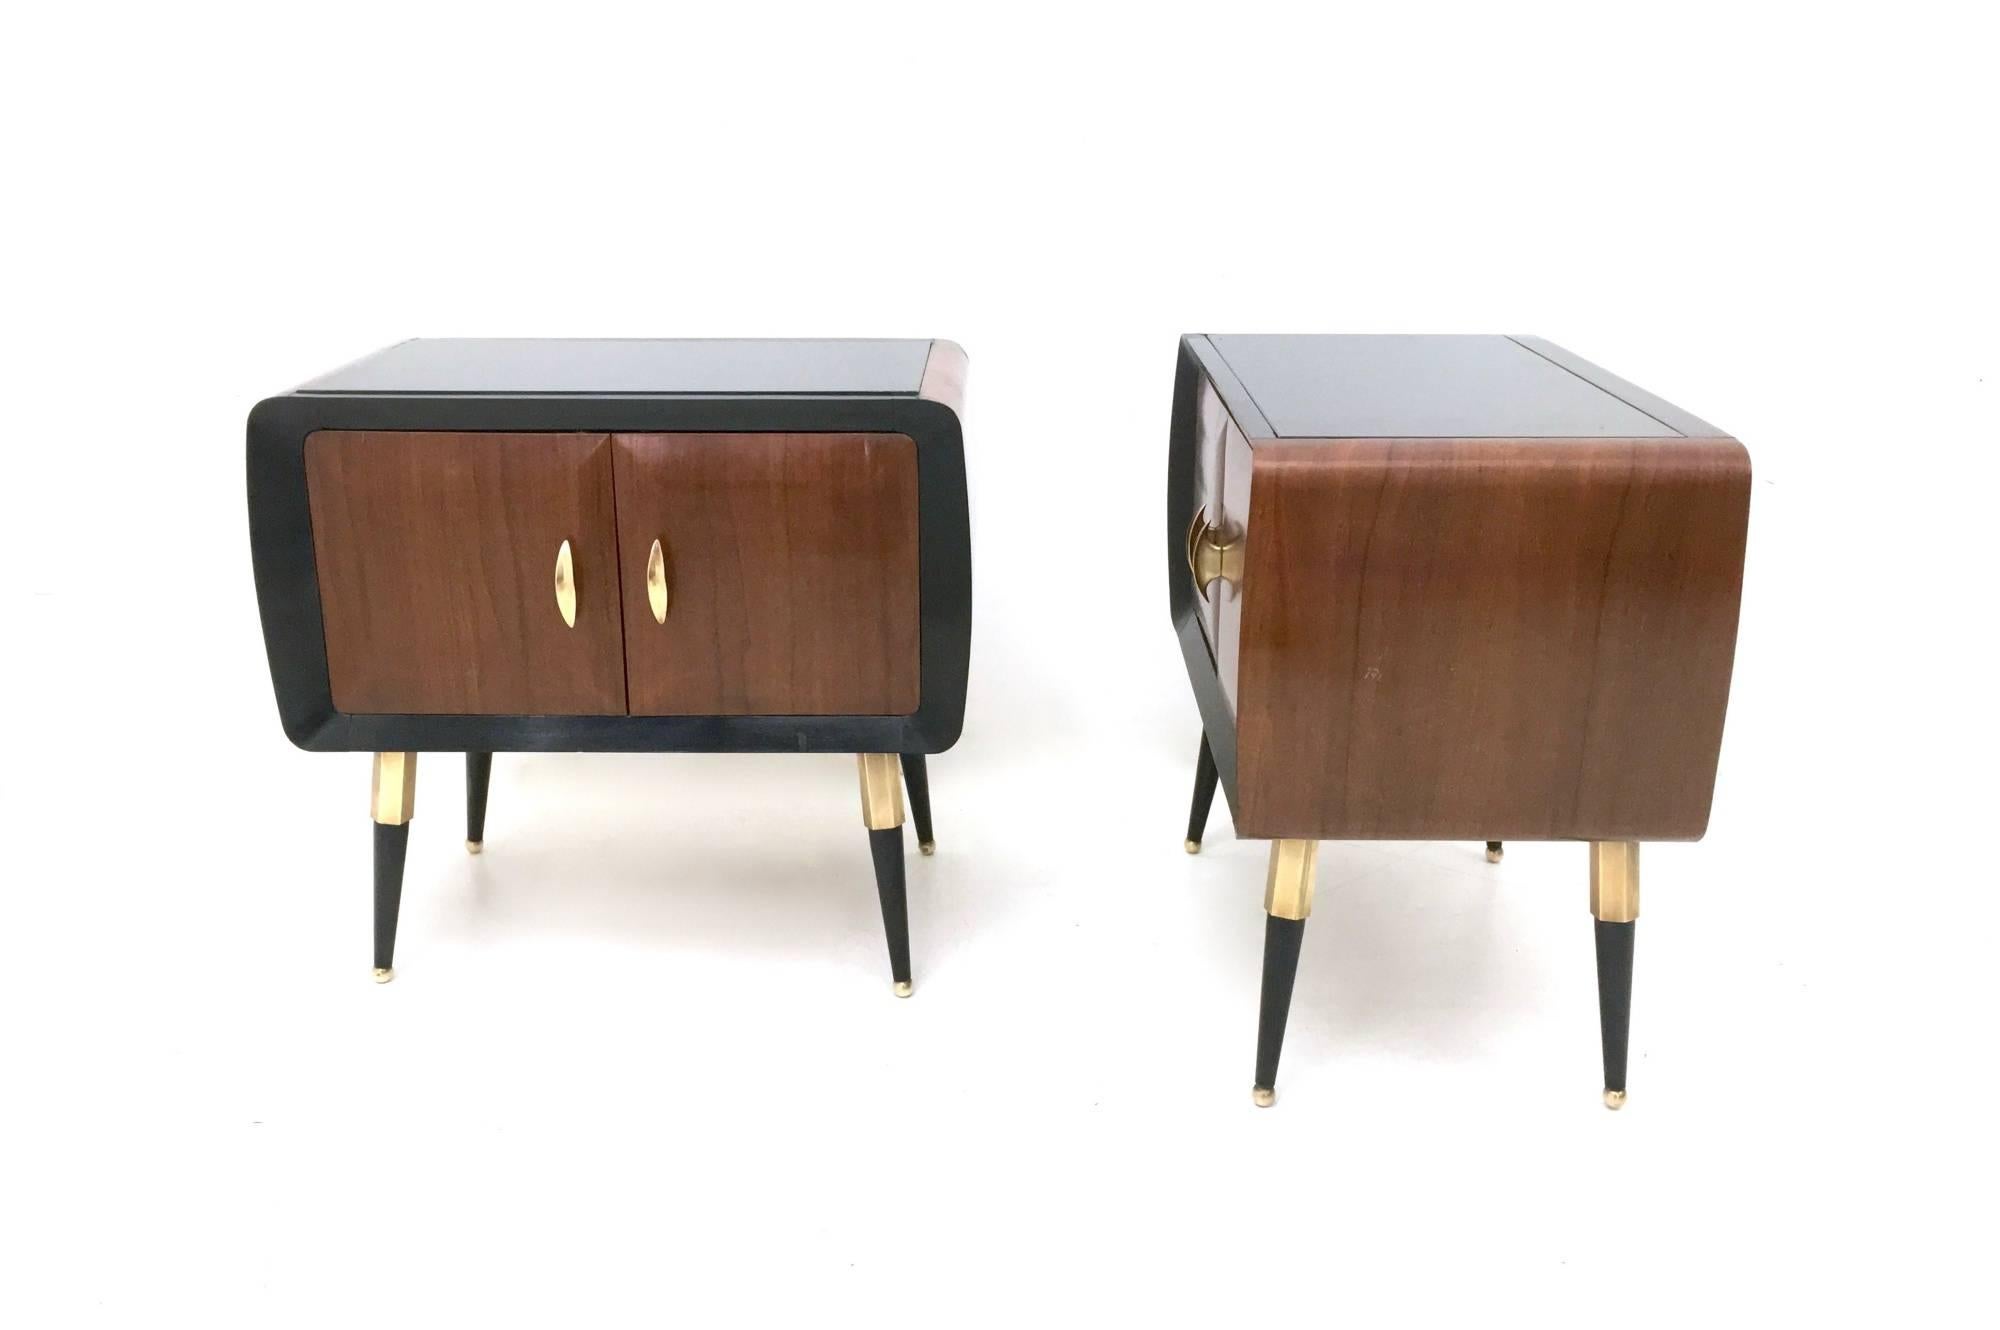 Varnished Pair of Mahogany Nightstands with Back-Painted Glass Top, Italy, 1950s